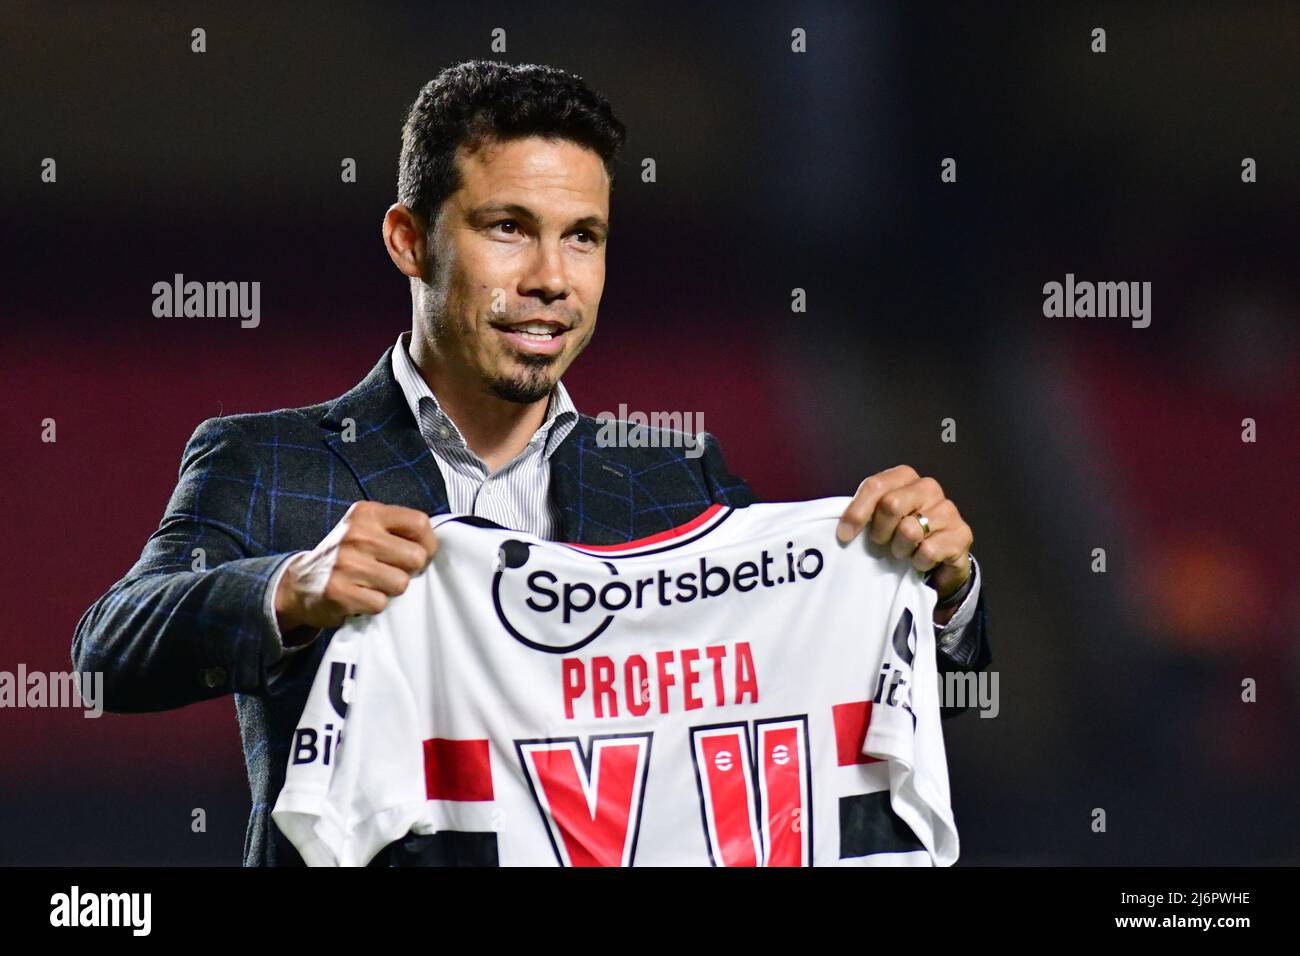 SÃO PAULO, BRASIL - MAY 2: Football player Hernanes of Brazil announces his retirement from football after an 18-year career. His career included spells at São Paulo F.C, Lazio, Inter Milan, and Juventus among other clubs. The midfielder receives a tribute before the Campeonato Brasileiro Série A 2022 match between São Paulo F.C and Santos F.C at Morumbi Stadium on May 2, 2022, in Sao Paulo, Brazil. (Photo by Leandro Bernardes/PxImages) Stock Photo